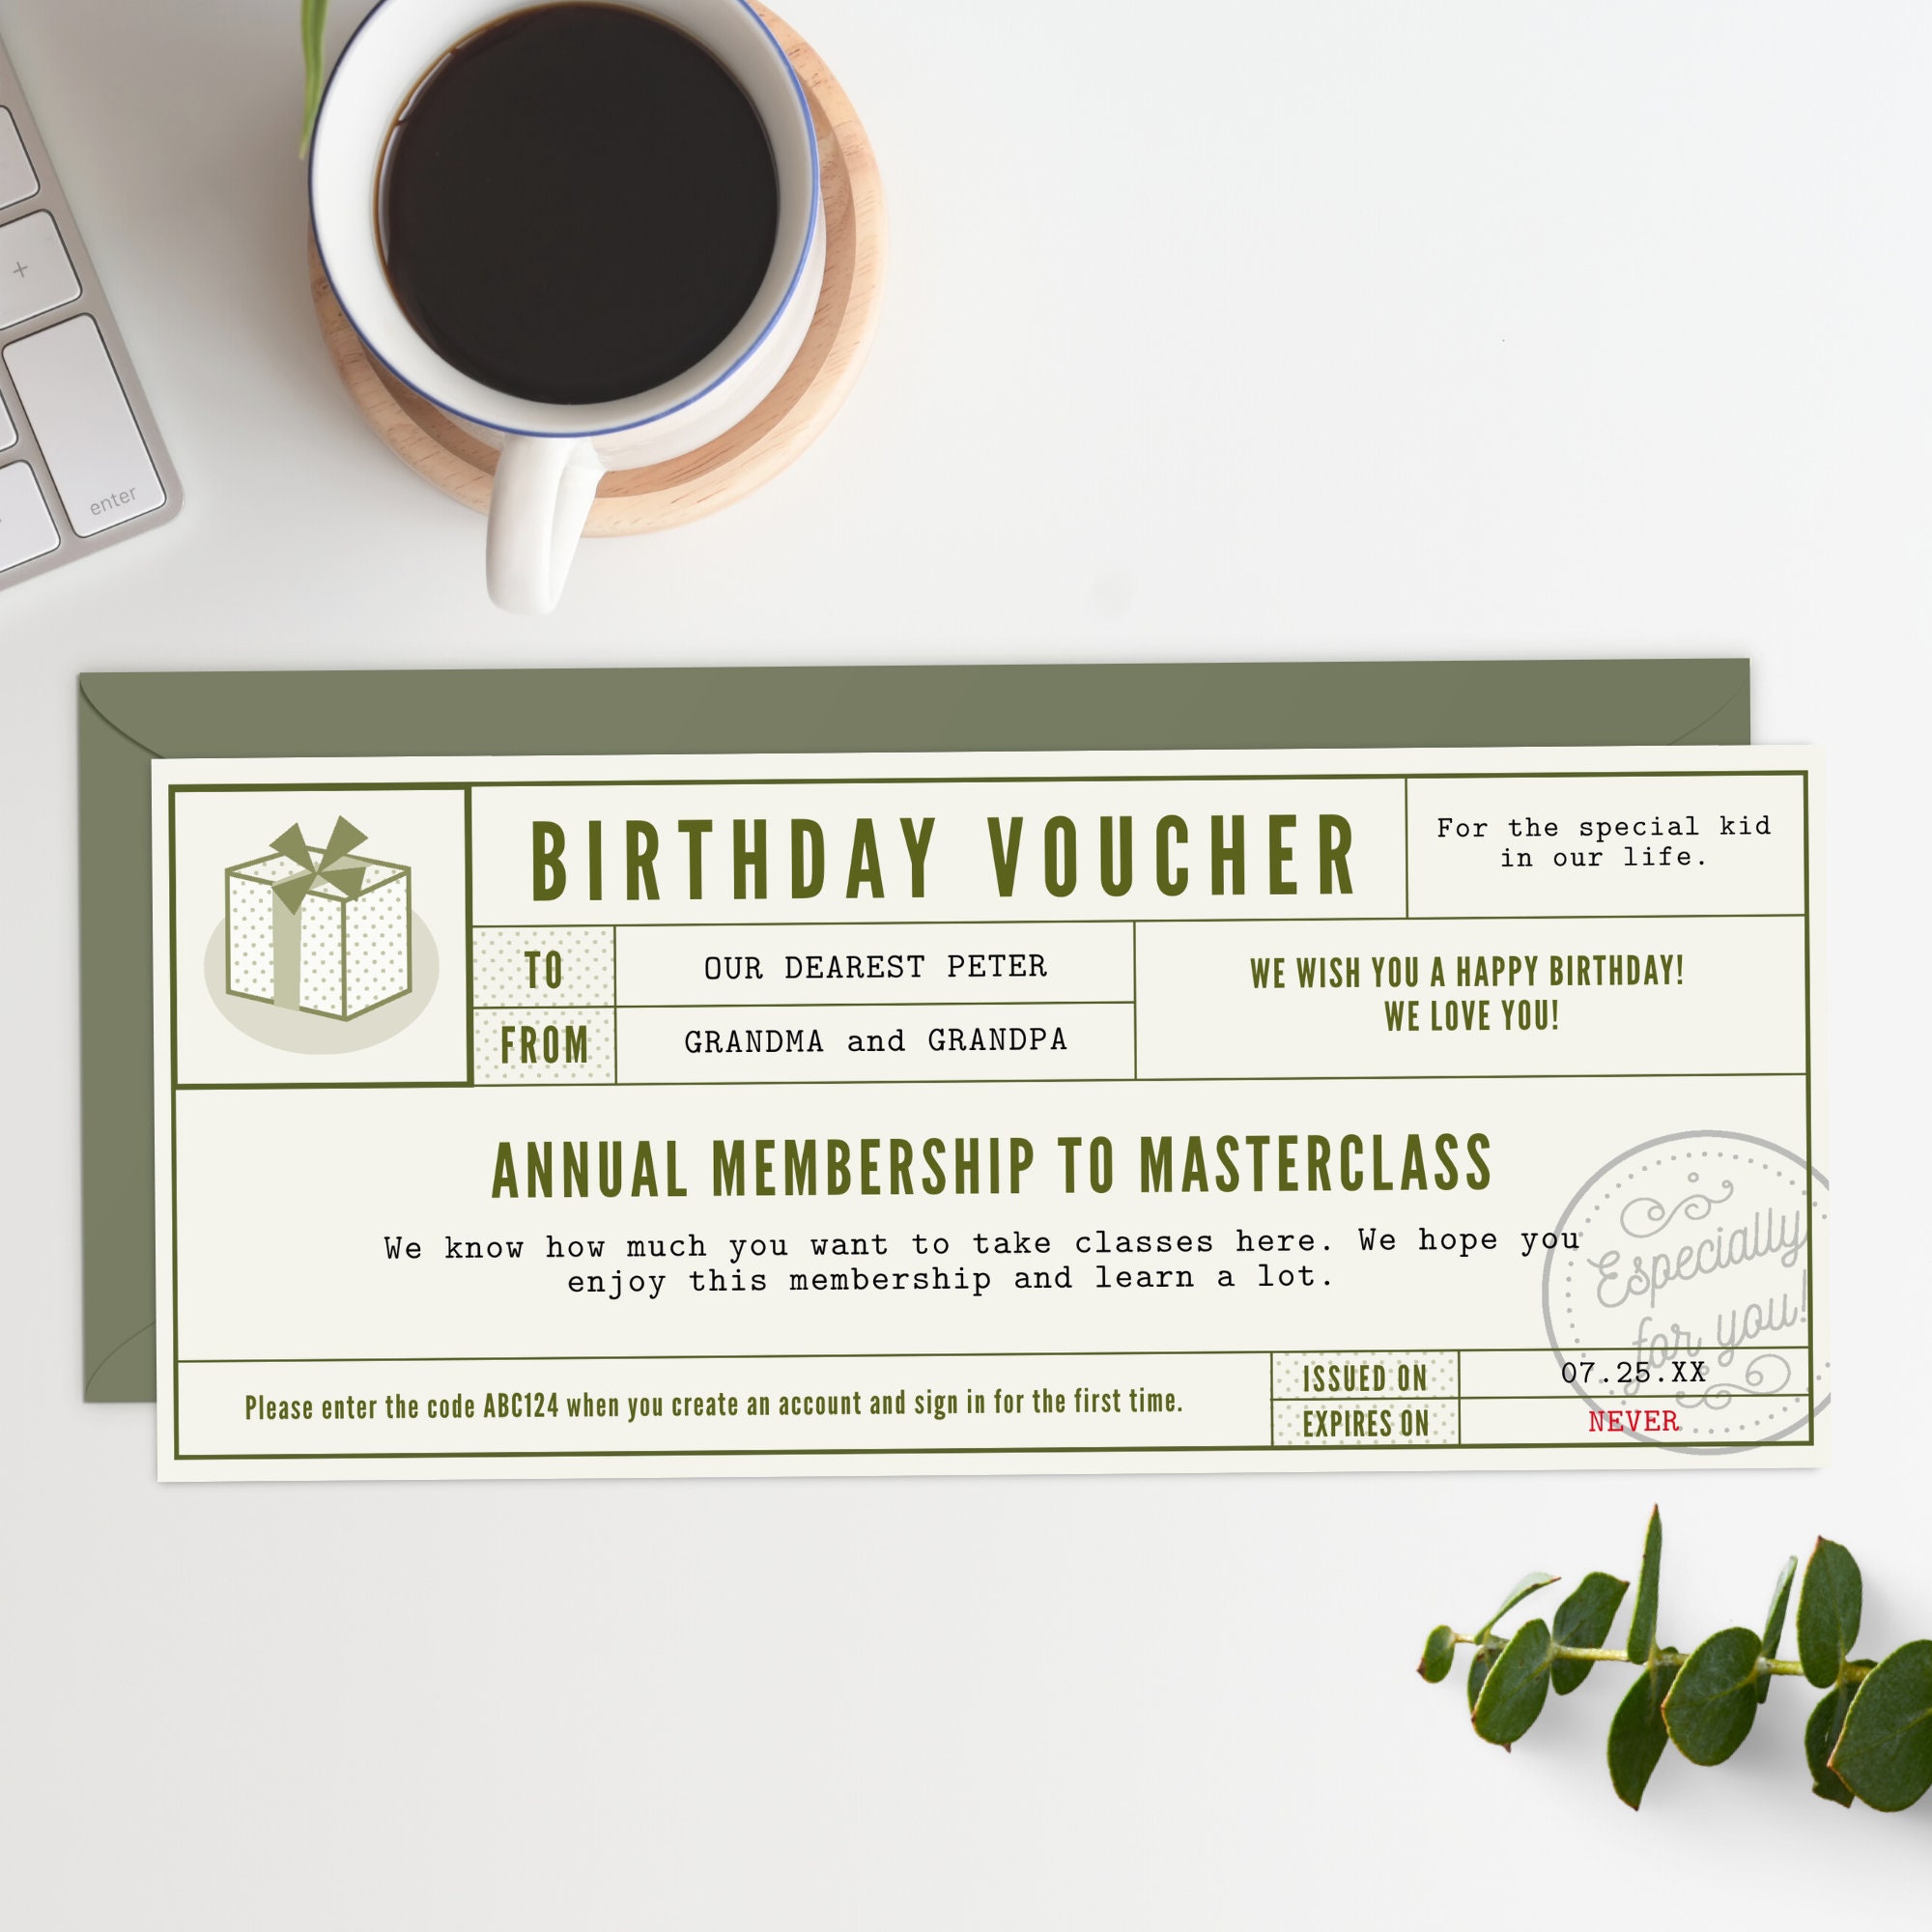 Blank Gift Certificates for Business - 25 Rustic Gift Certificate Cards  with for Spa, Salon, Restaurants, Custom Client Vouchers for Birthday, 4x9